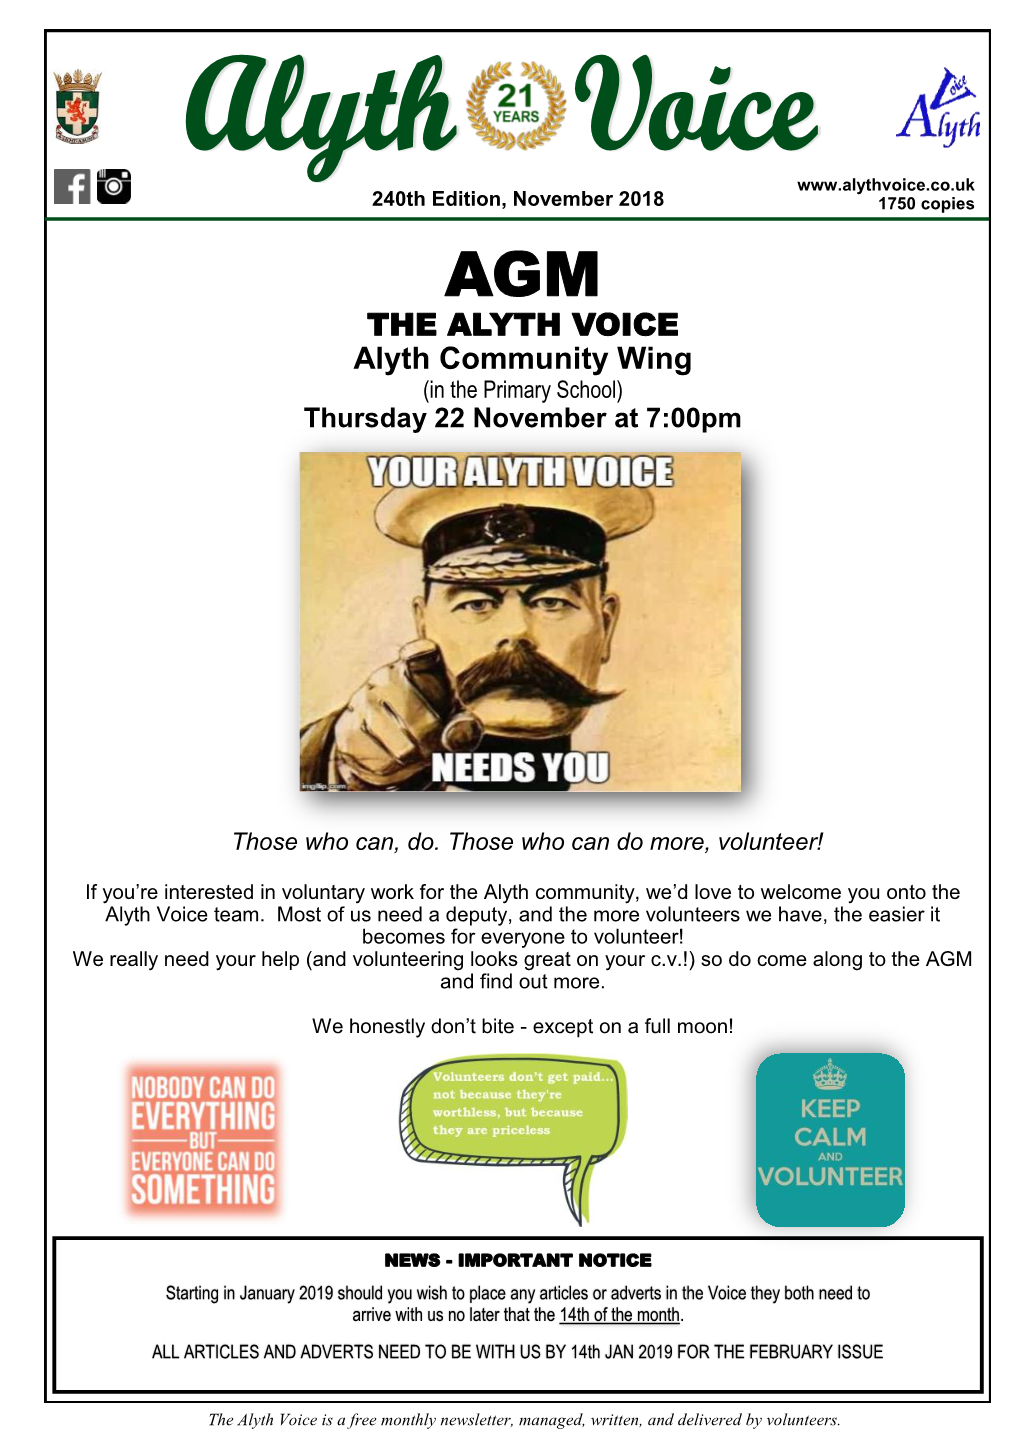 November 2018 1750 Copies AGM the ALYTH VOICE Alyth Community Wing (In the Primary School) Thursday 22 November at 7:00Pm